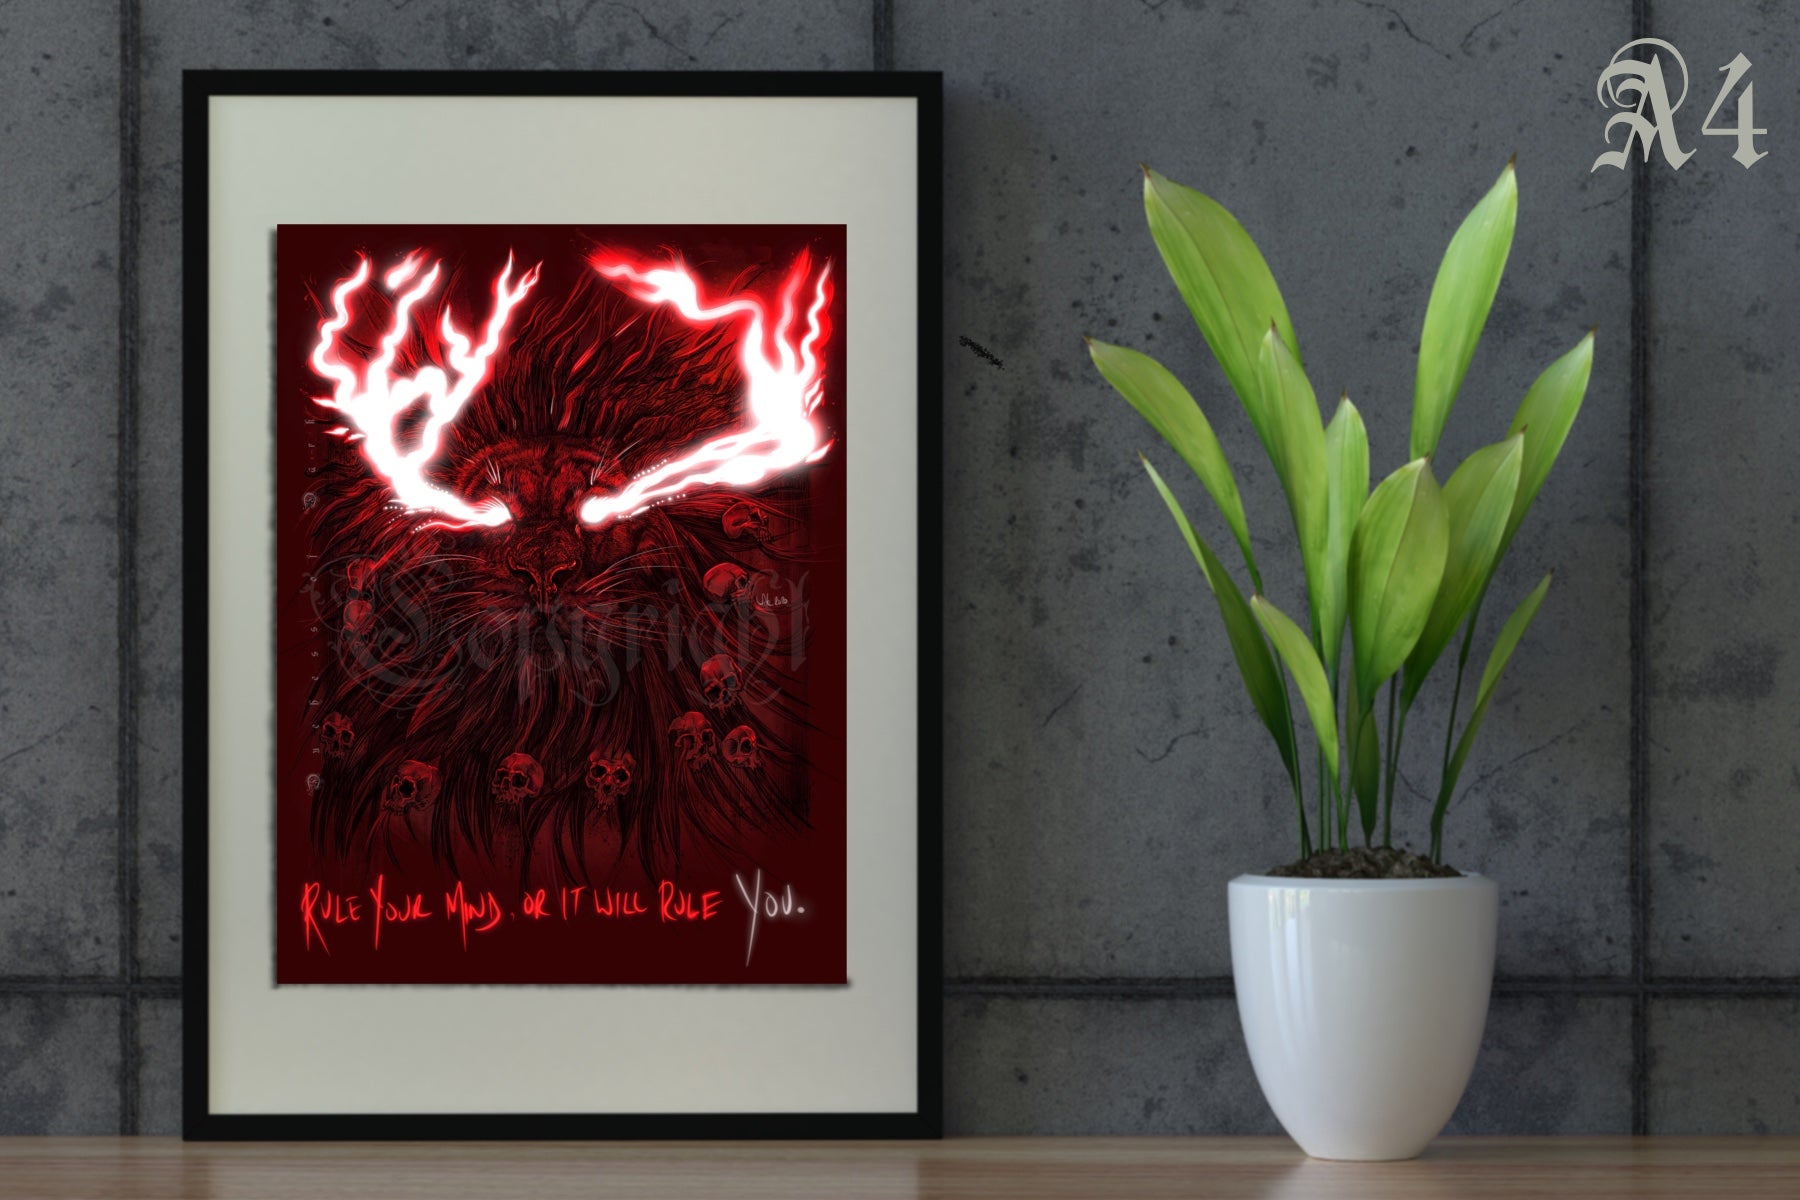 Lion Skull Giclee Fine Art Print A5/A4 ‘Rule Your Mind’ - Blood & Fire Edition art gothic print